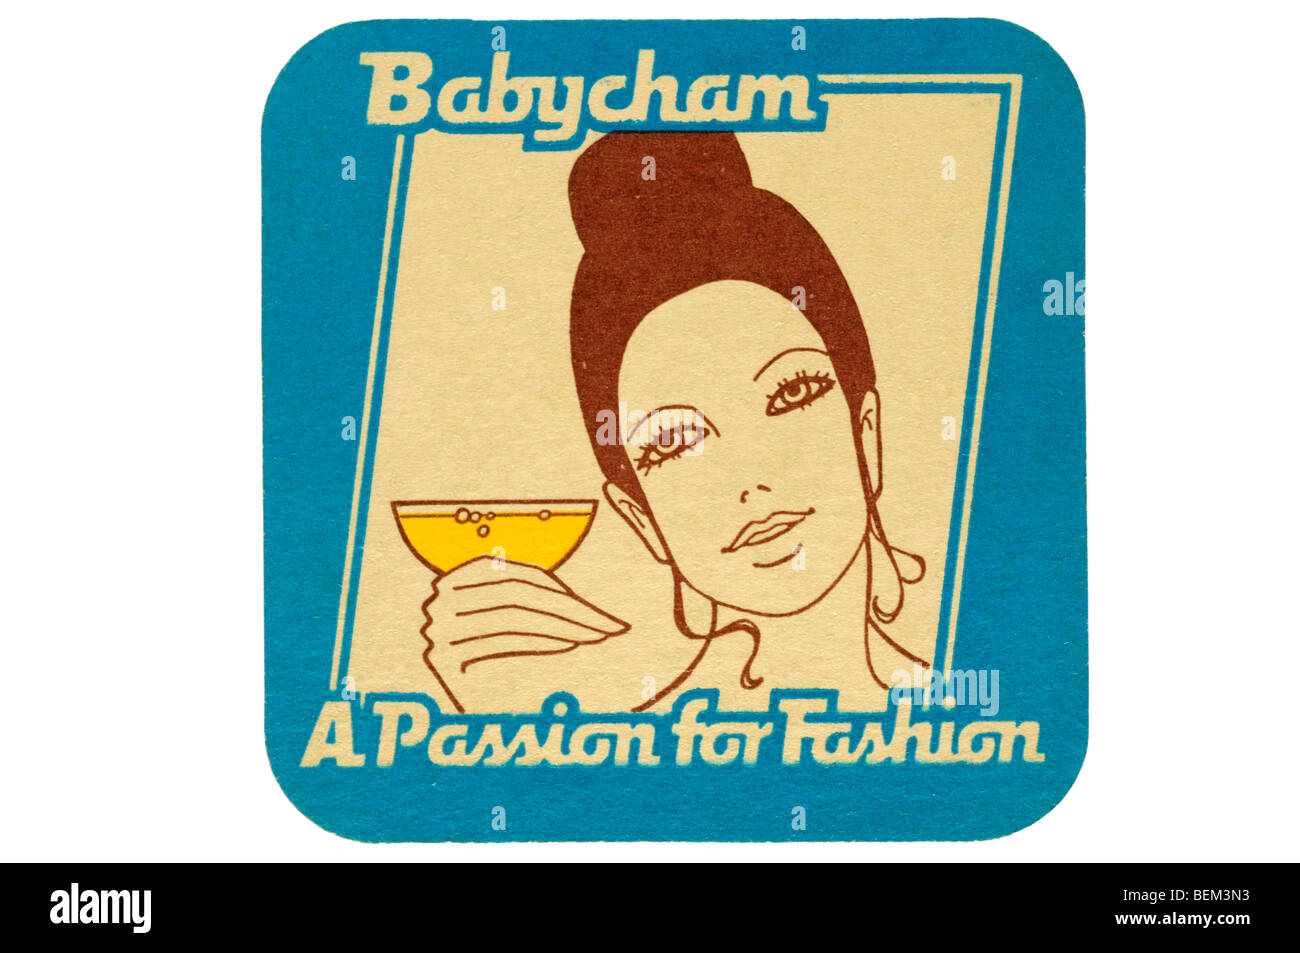 babycham a passion for fashion Stock Photo